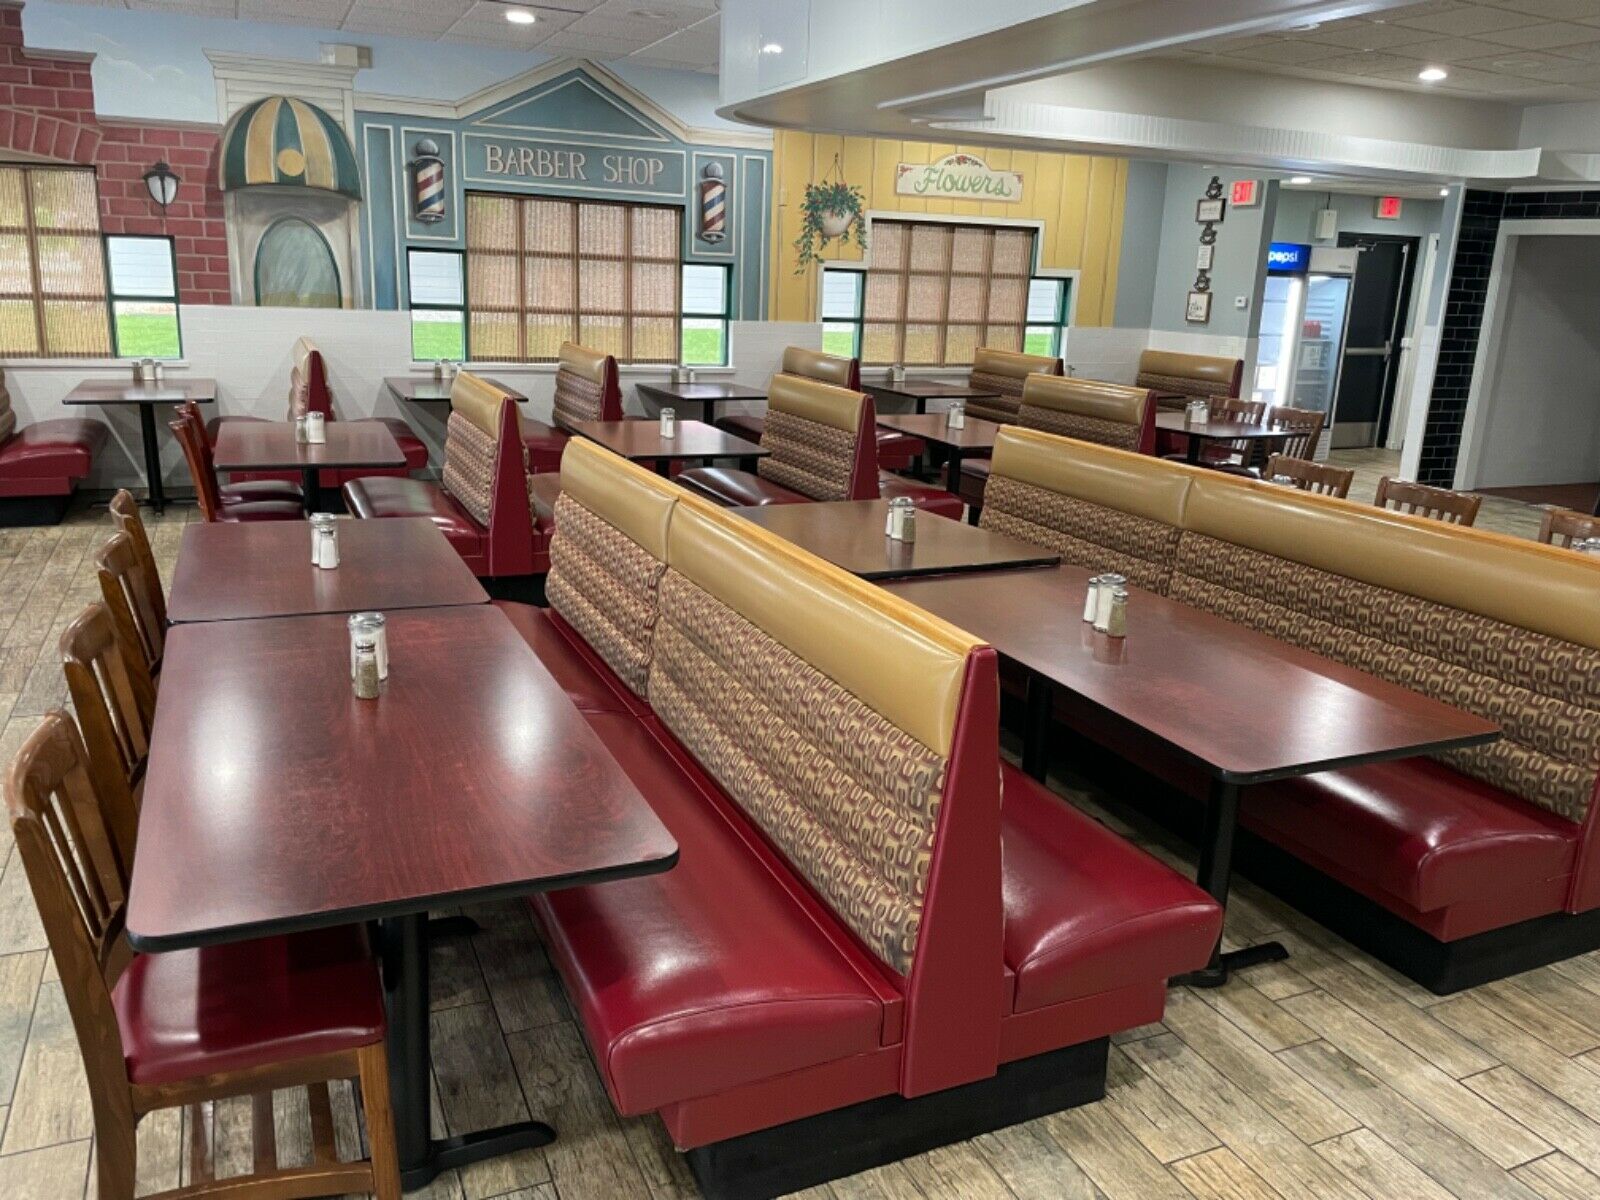 Restauant Furniture. Restaraunt Booths Chairs Tables